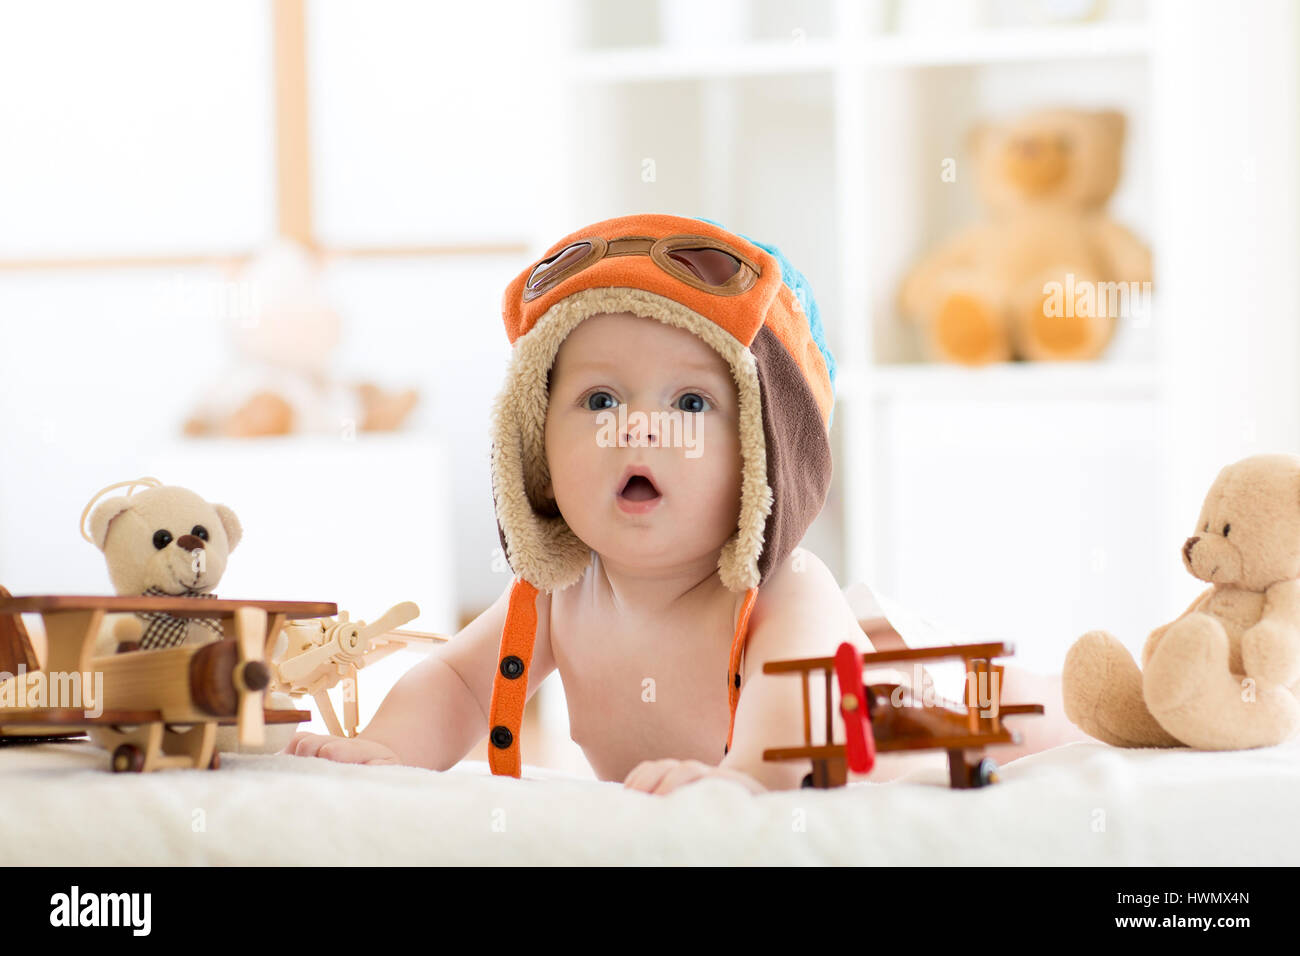 Funny baby boy weared pilot hat with wooden airplane and teddy bear toys Stock Photo